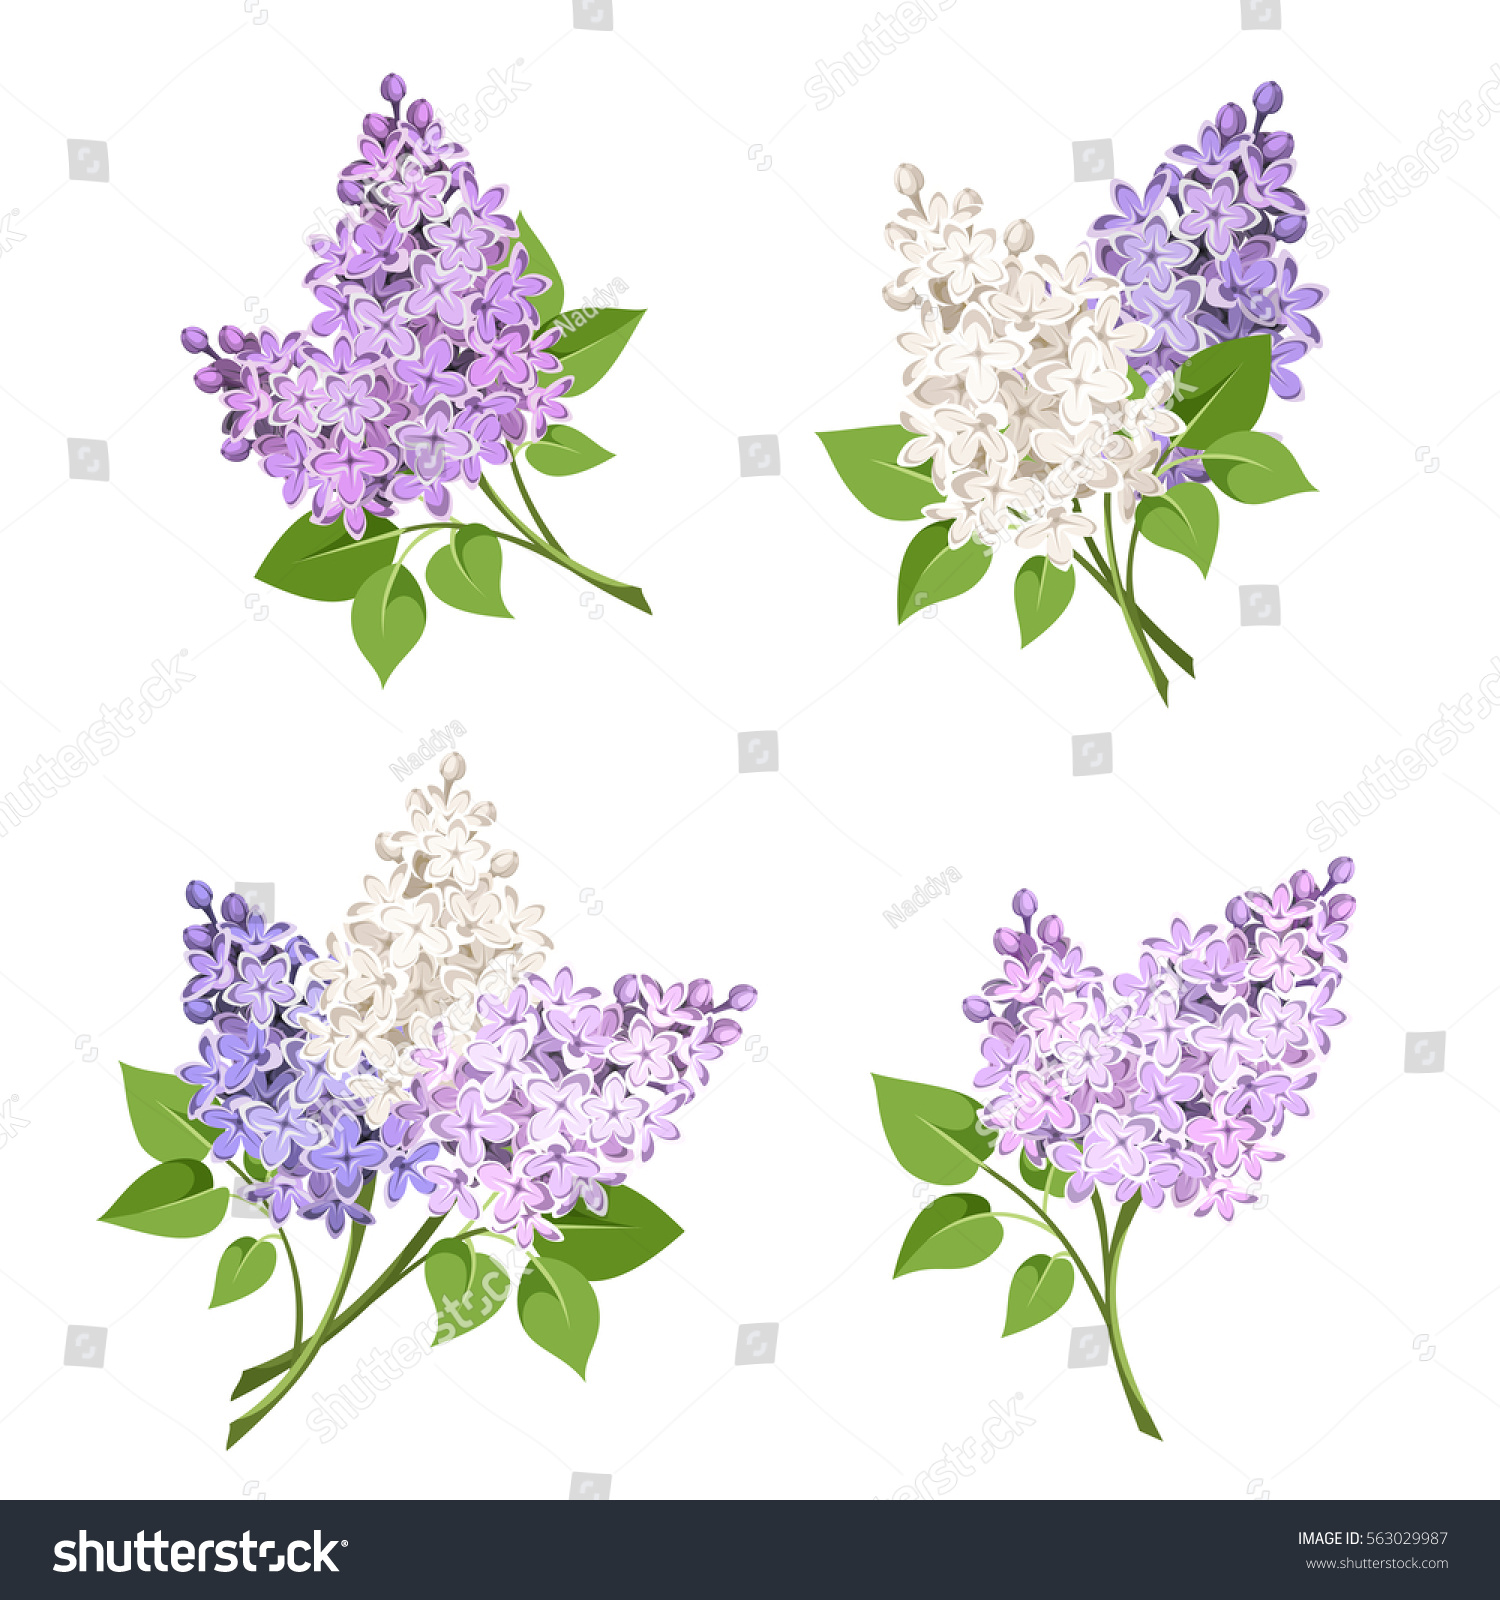 SVG of Vector set of branches of purple and white lilac flowers isolated on a white background. svg